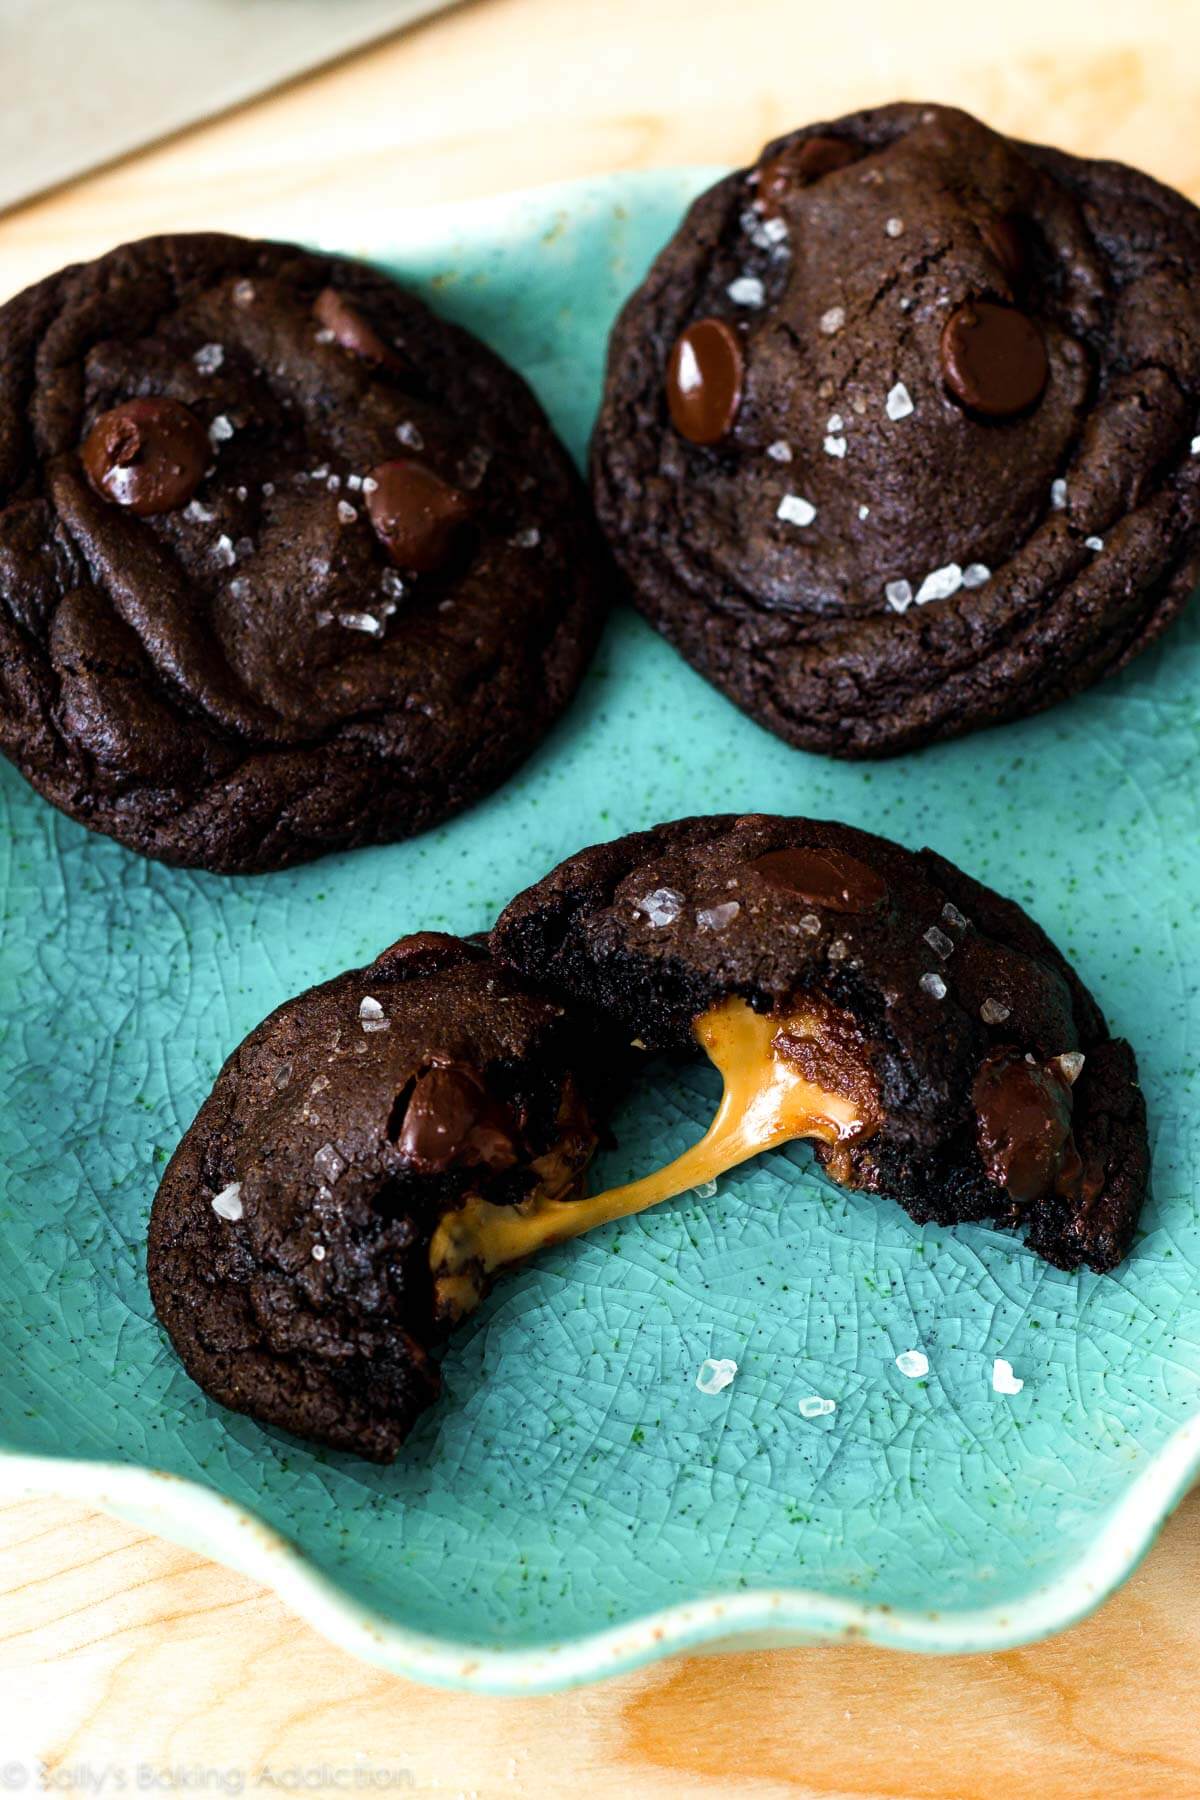 Dark chocolate cookies with sea salt and caramel on a teal plate